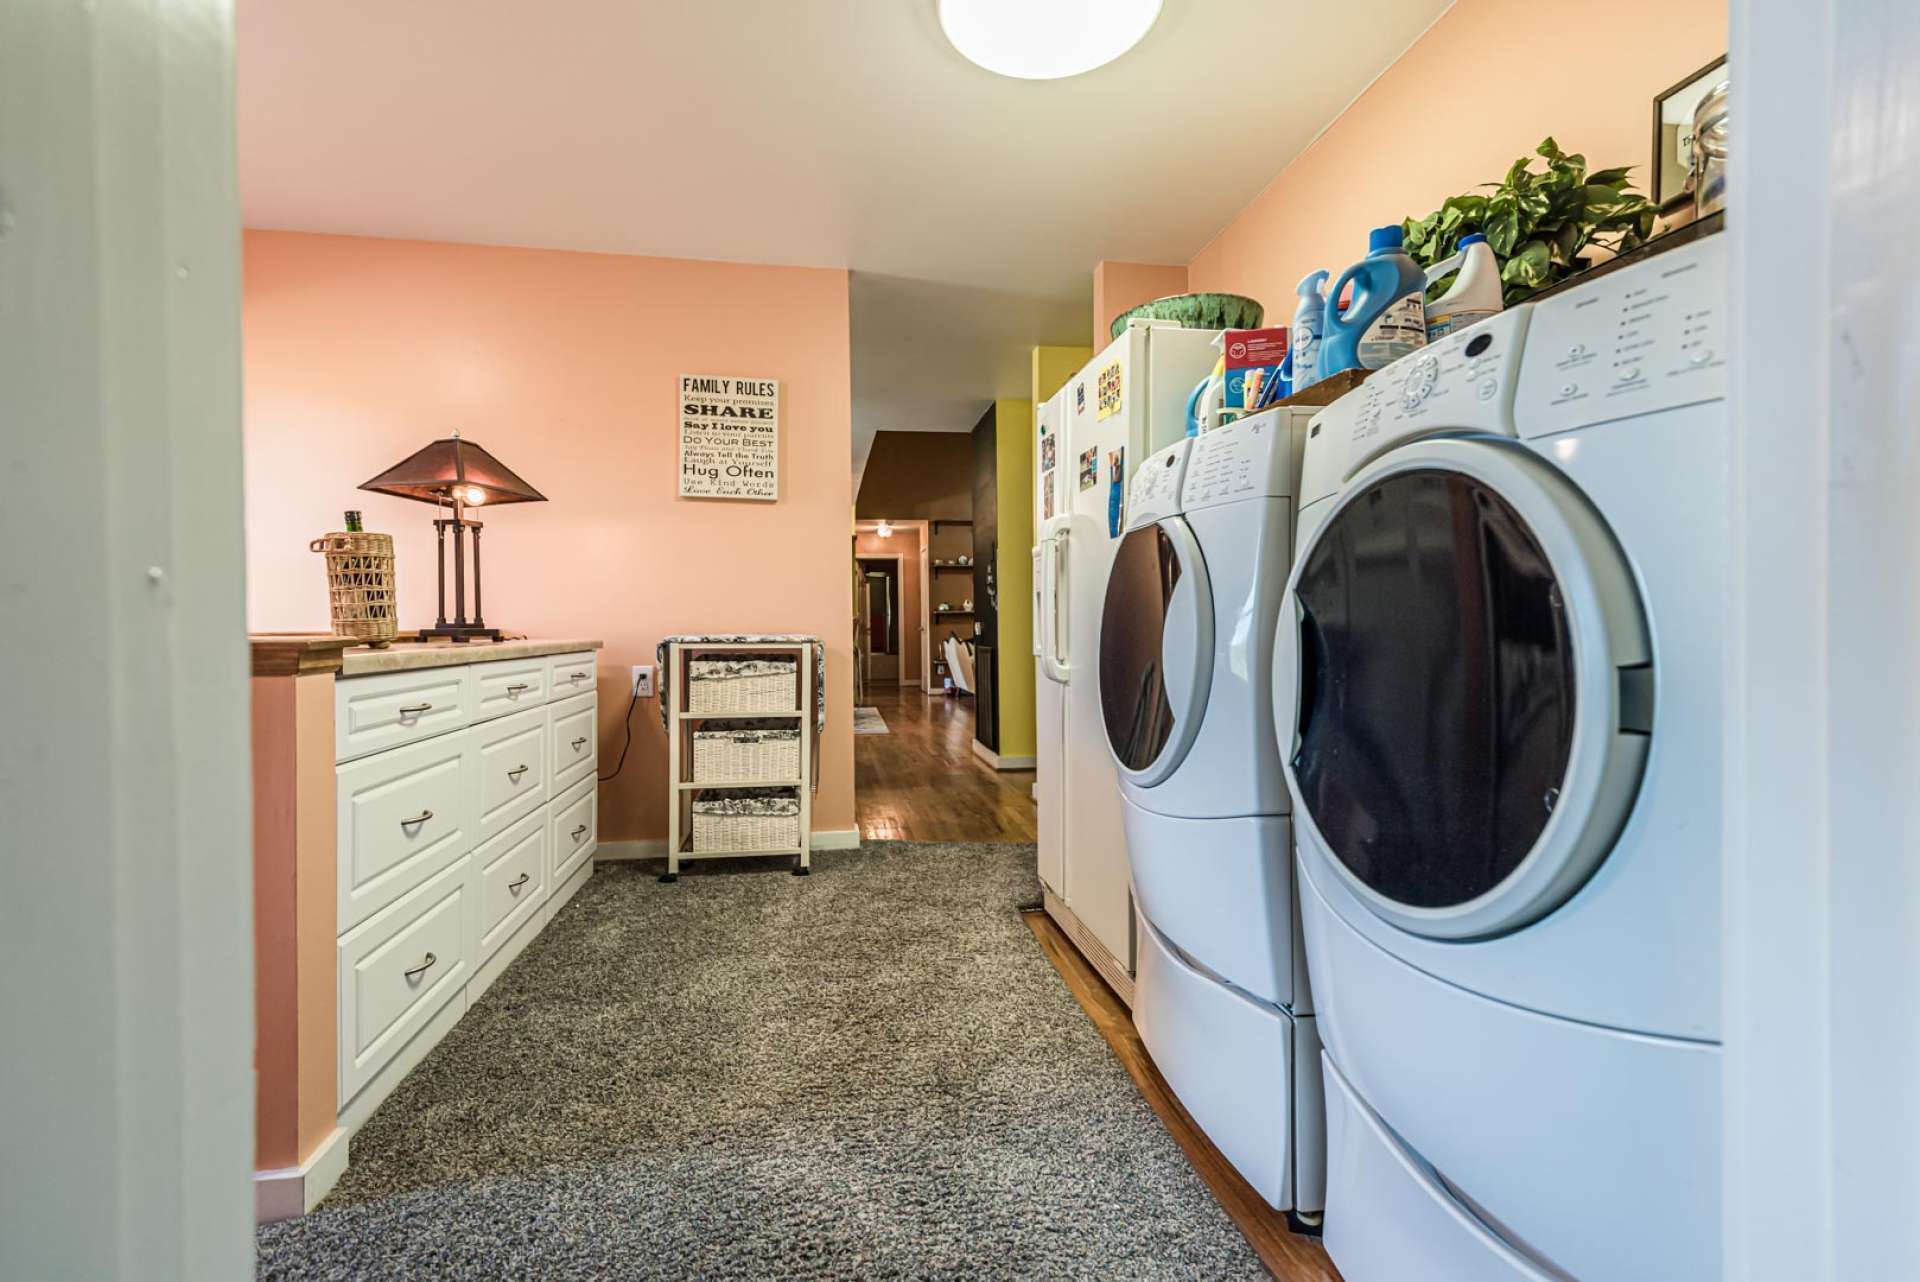 Just off of the kitchen, is a spacious laundry room.